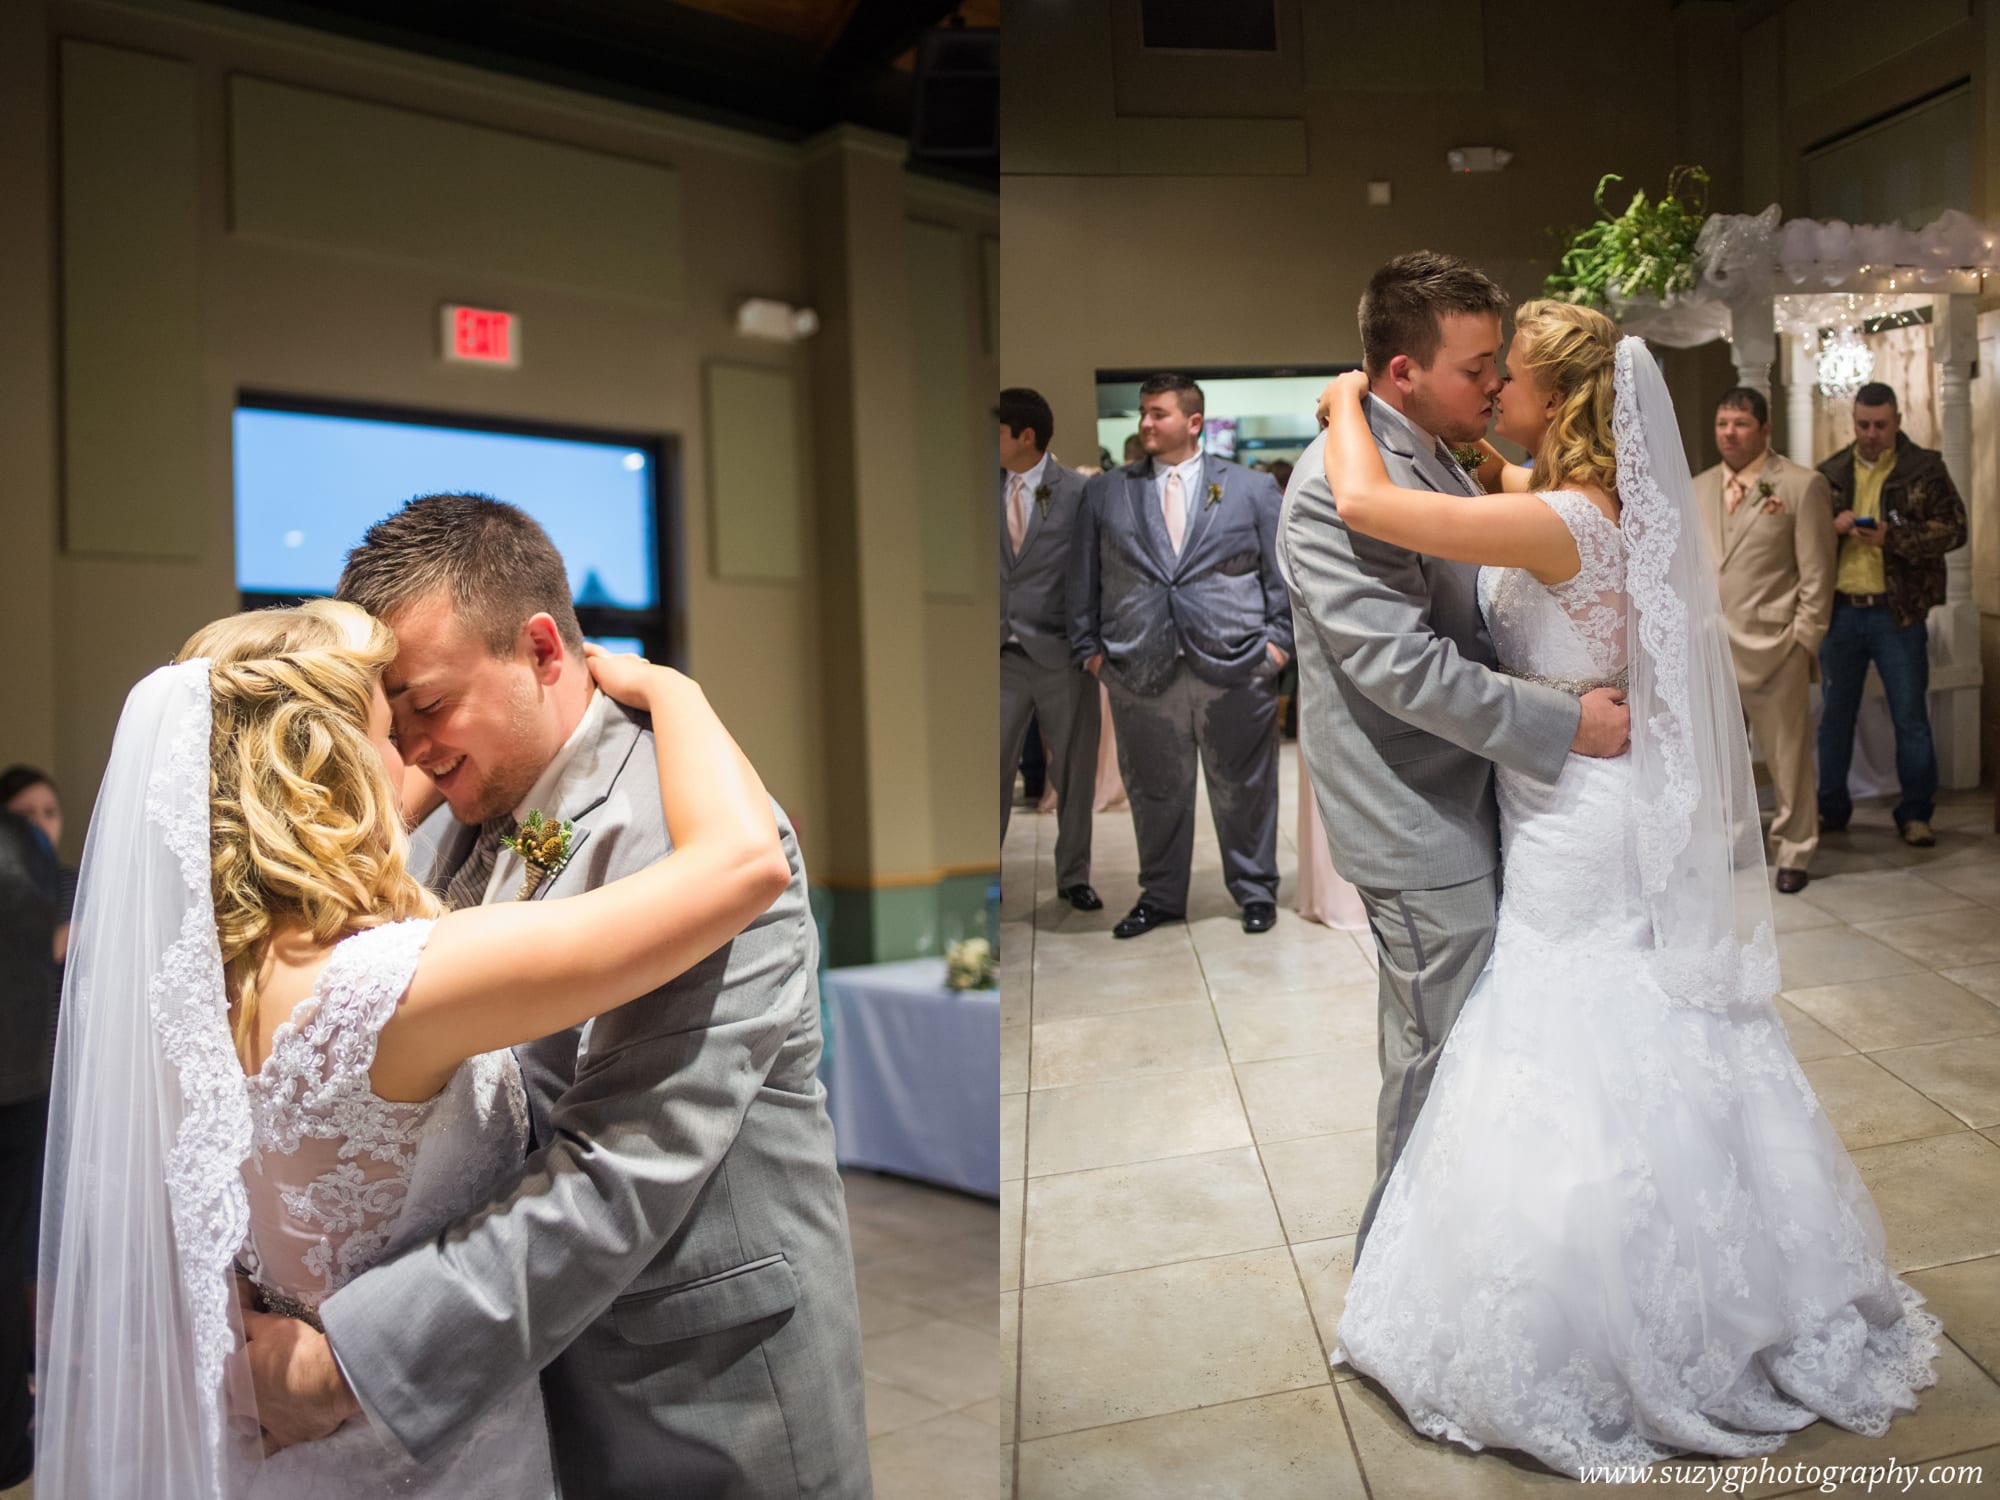 vows by victoria-lake charles-wedding-photography-suzy g-photography-suzygphotography_0078